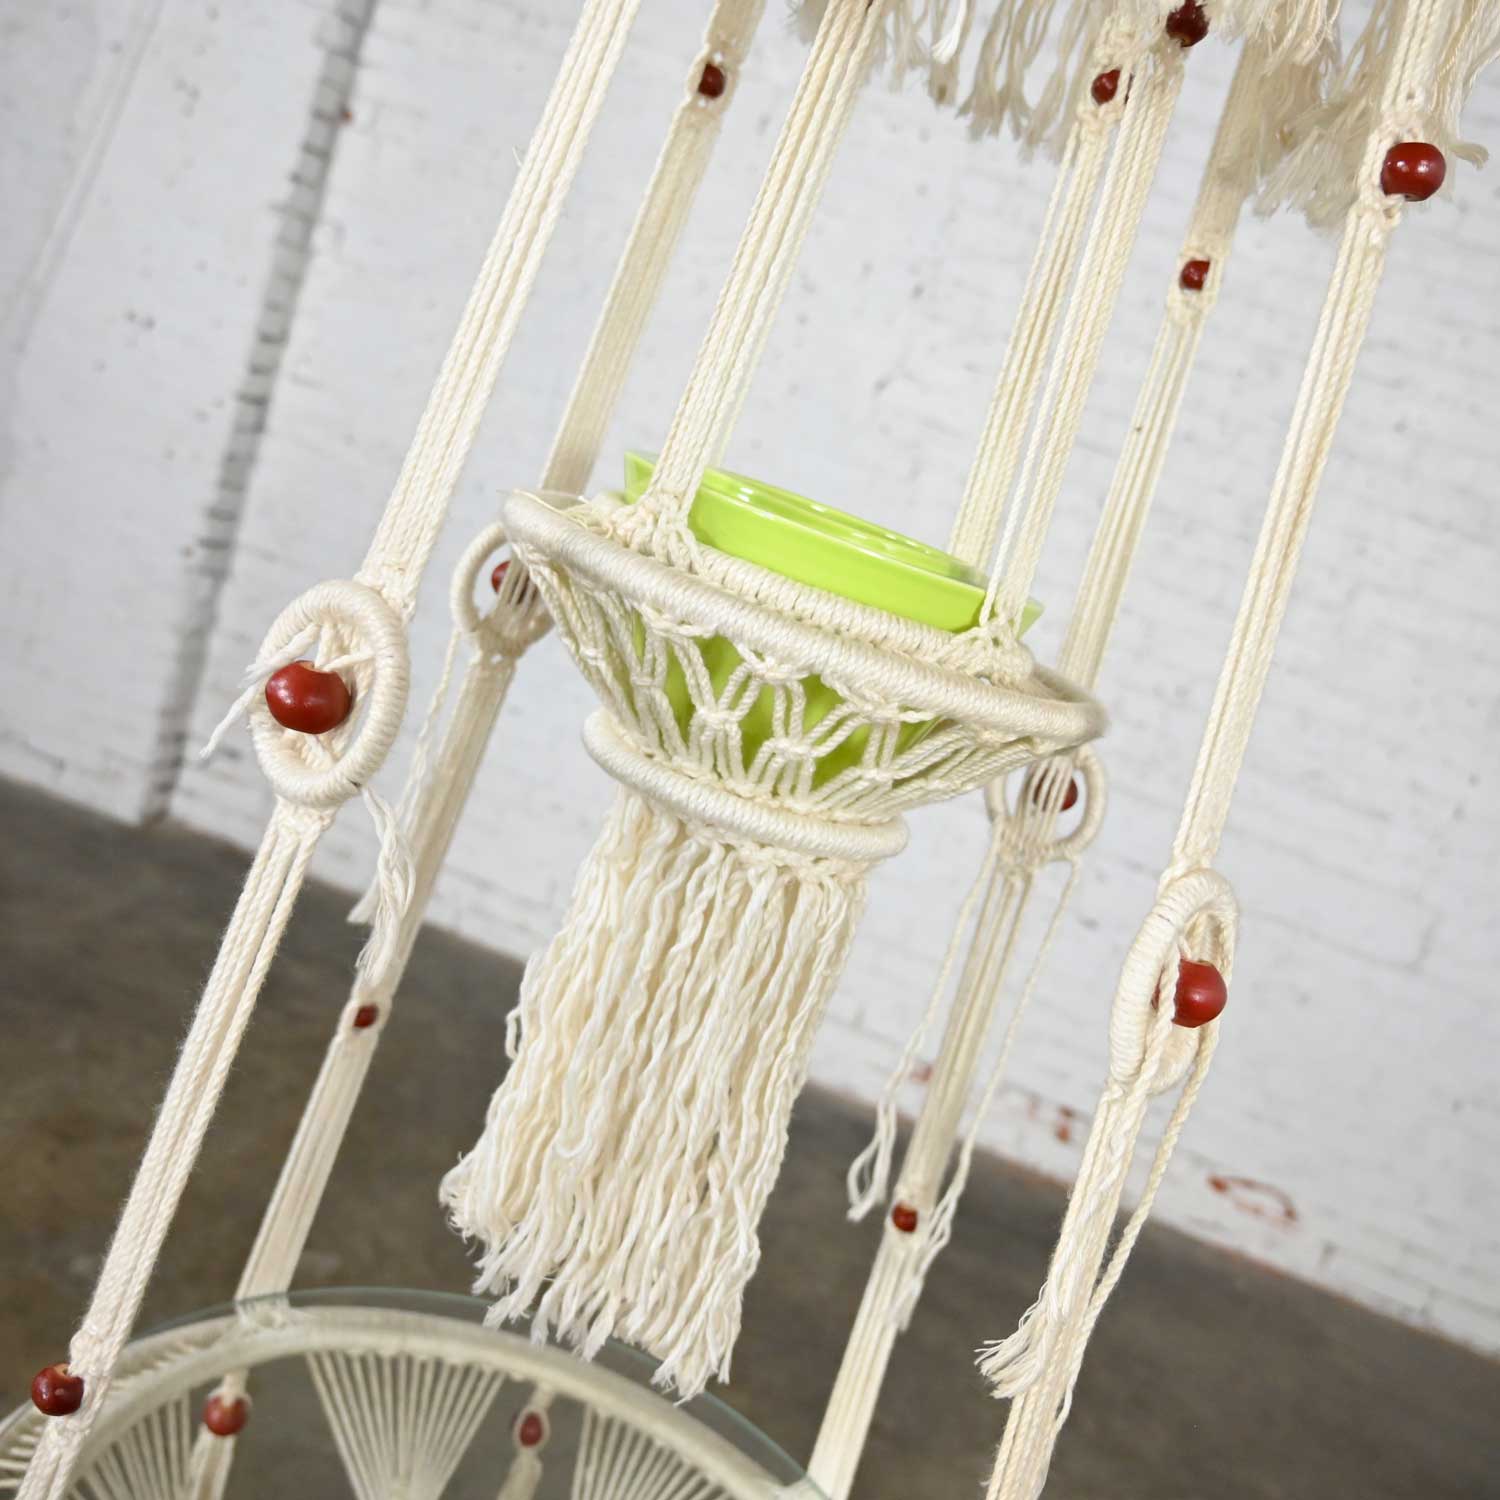 Vintage BoHo Chic White Cord Macramé Hanging Table with Round Glass Top & Green Pot